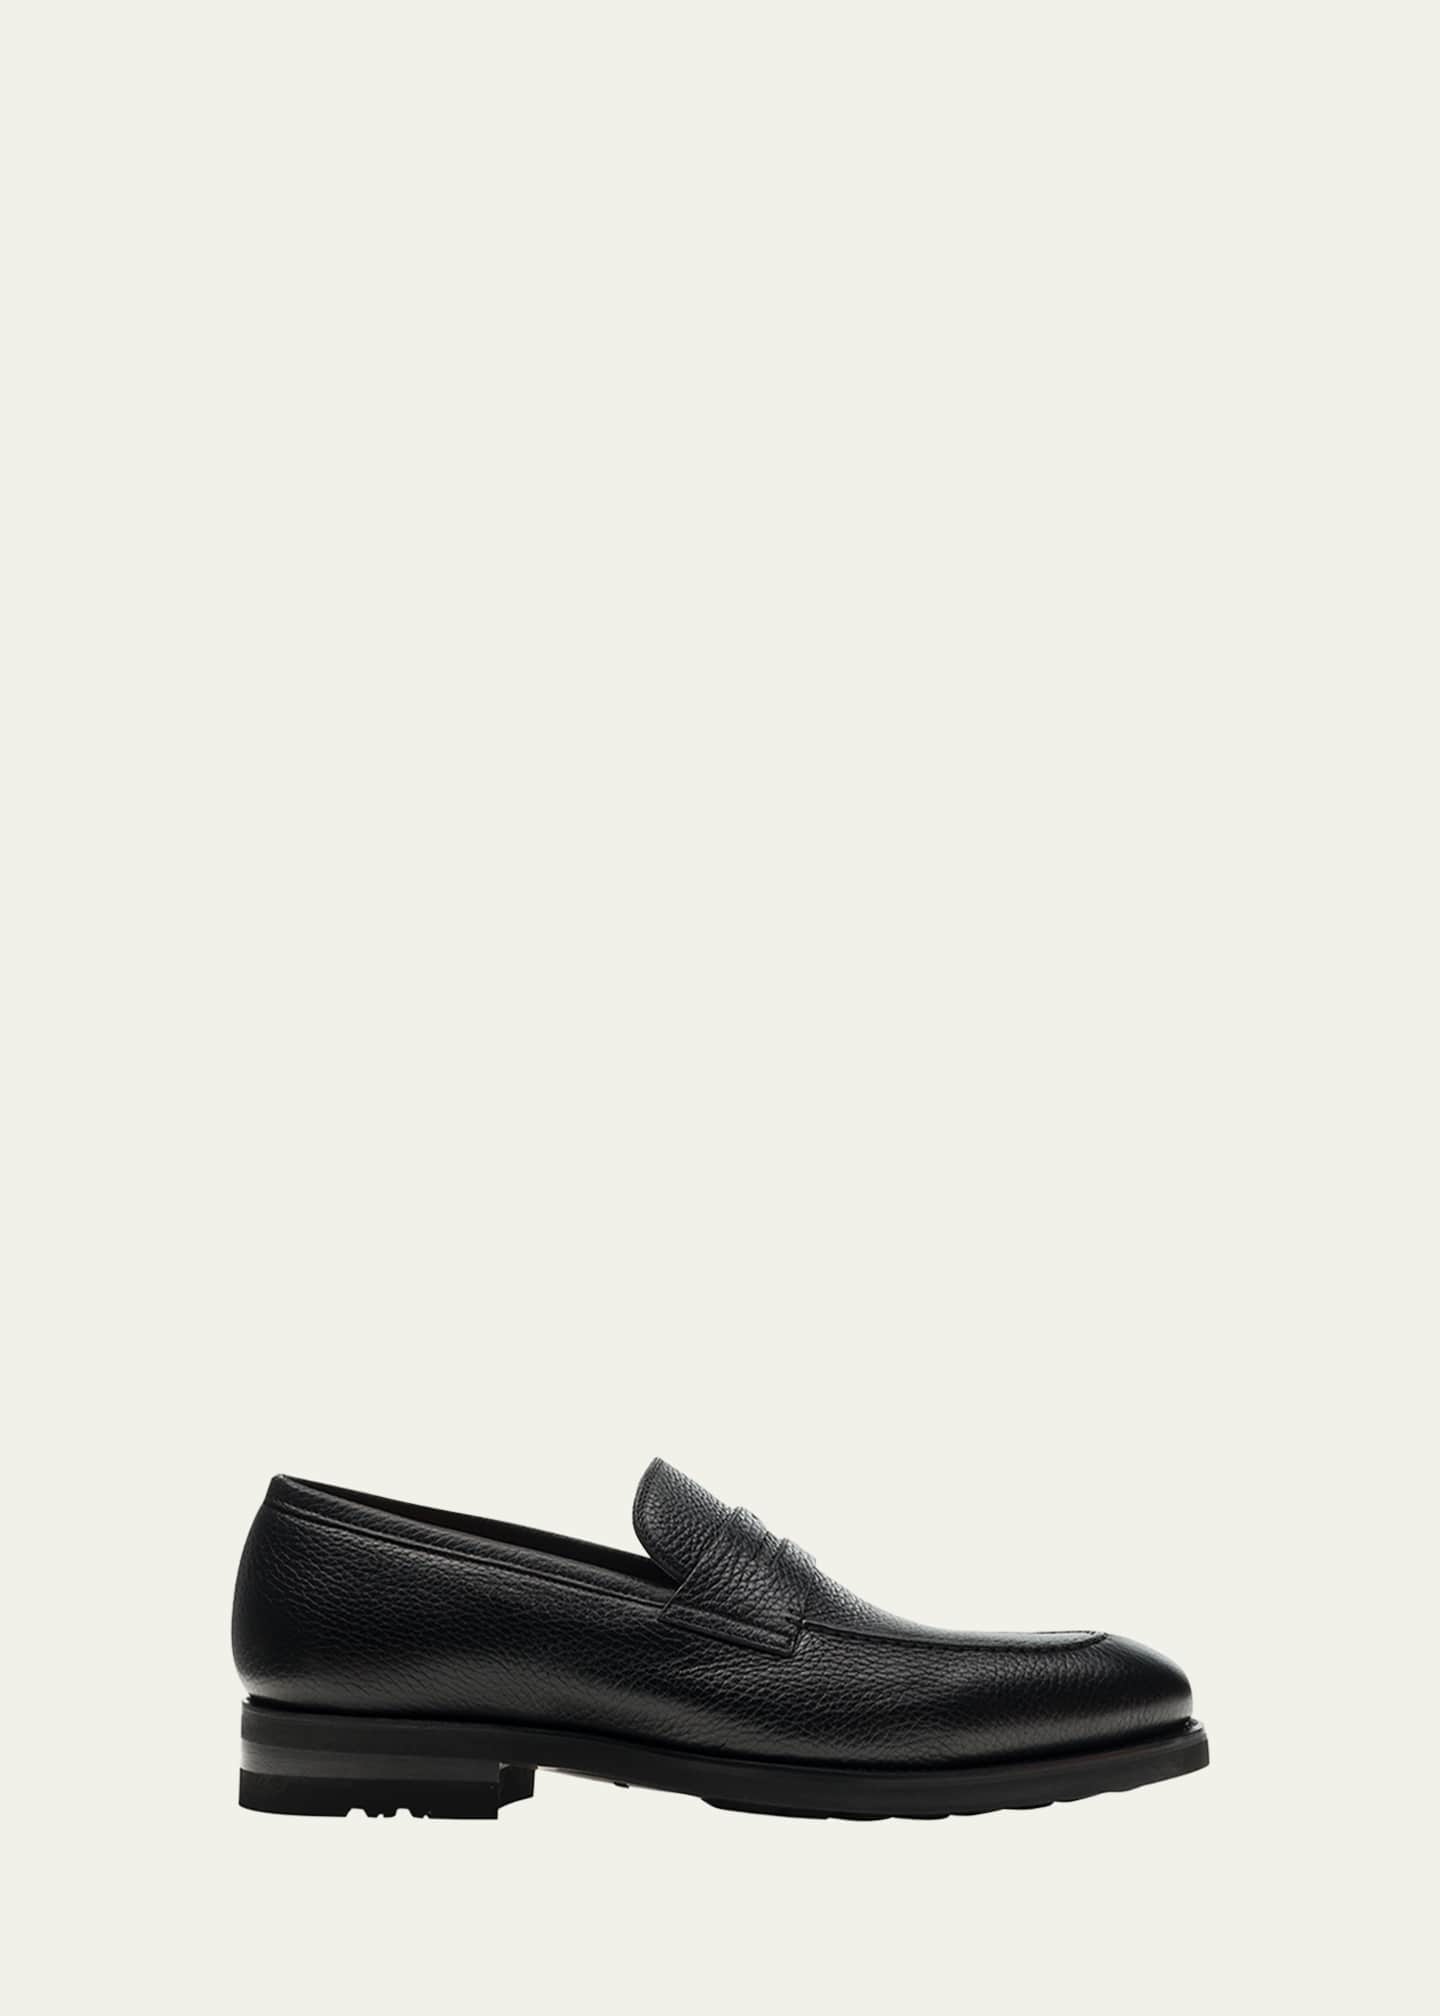 Magnanni Men's Matlin III Leather Penny Loafers - Bergdorf Goodman